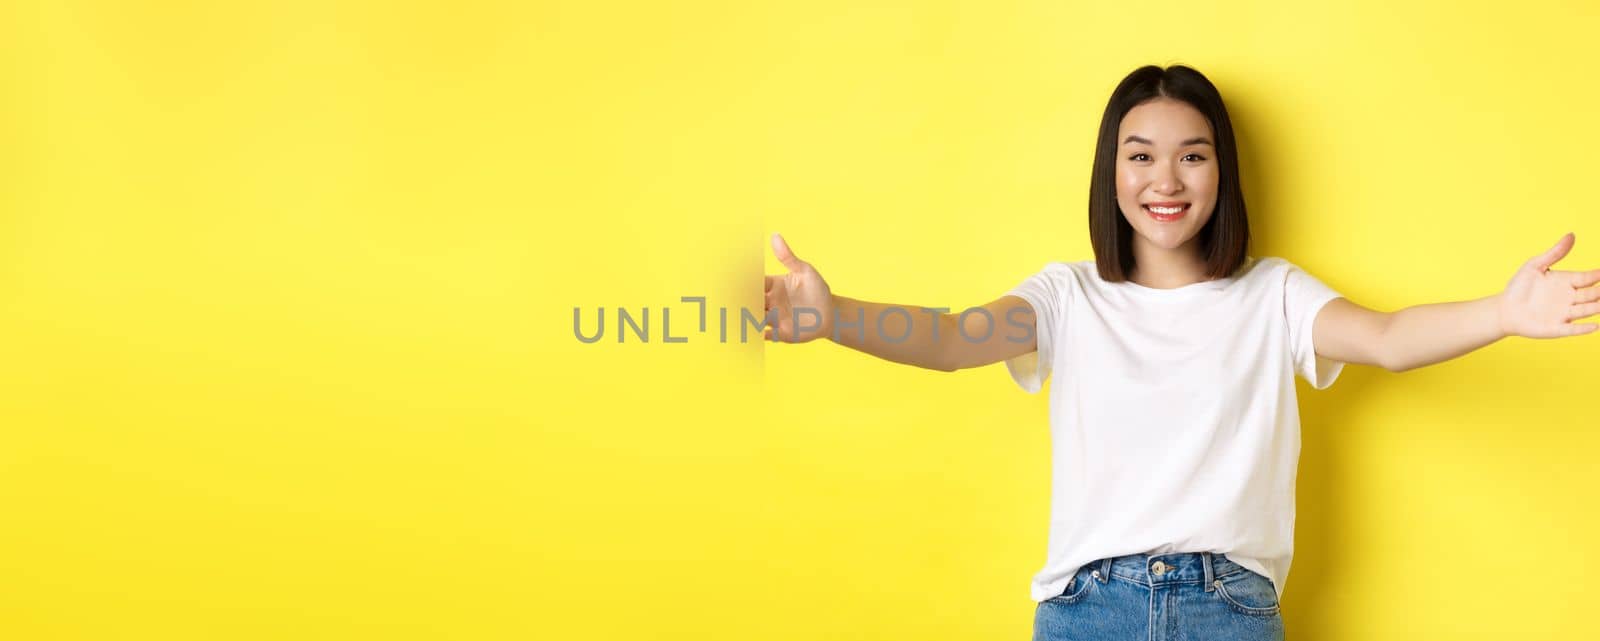 Beauty and fashion concept. Friendly asian woman spread out hands and smiling, waiting for hugs, inviting you, welcome someone and looking happy, standing over yellow background.